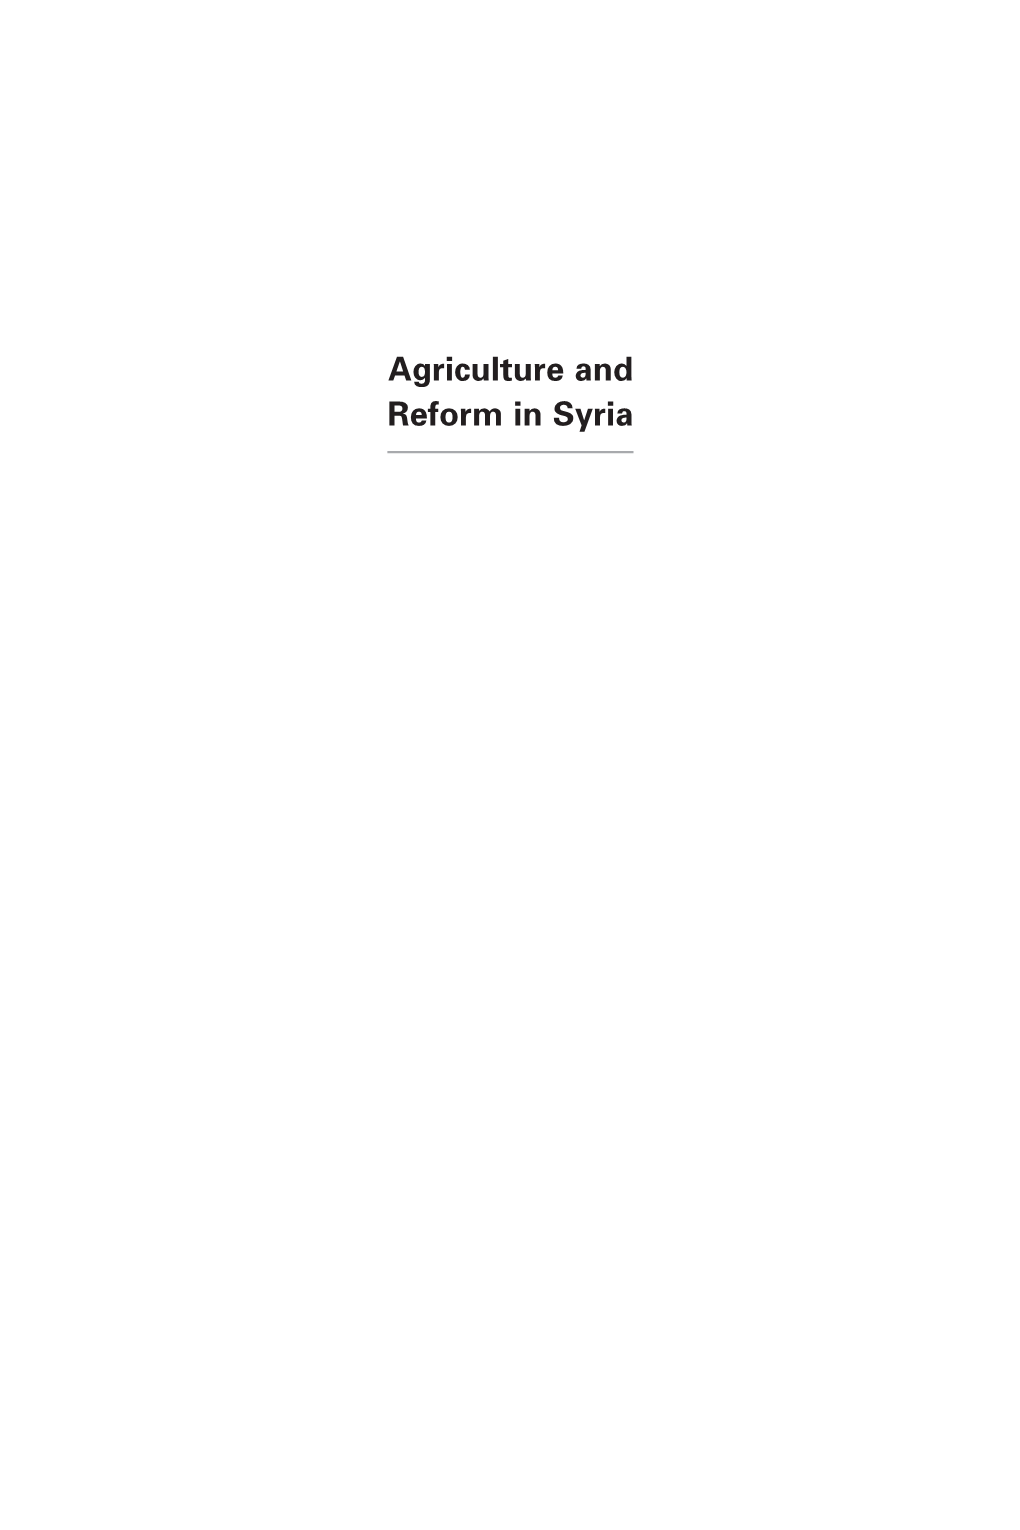 Agriculture and Reform in Syria Hinne-Ag-Fm.Qu:Hinnefm 10/7/10 3:30 PM Page 2